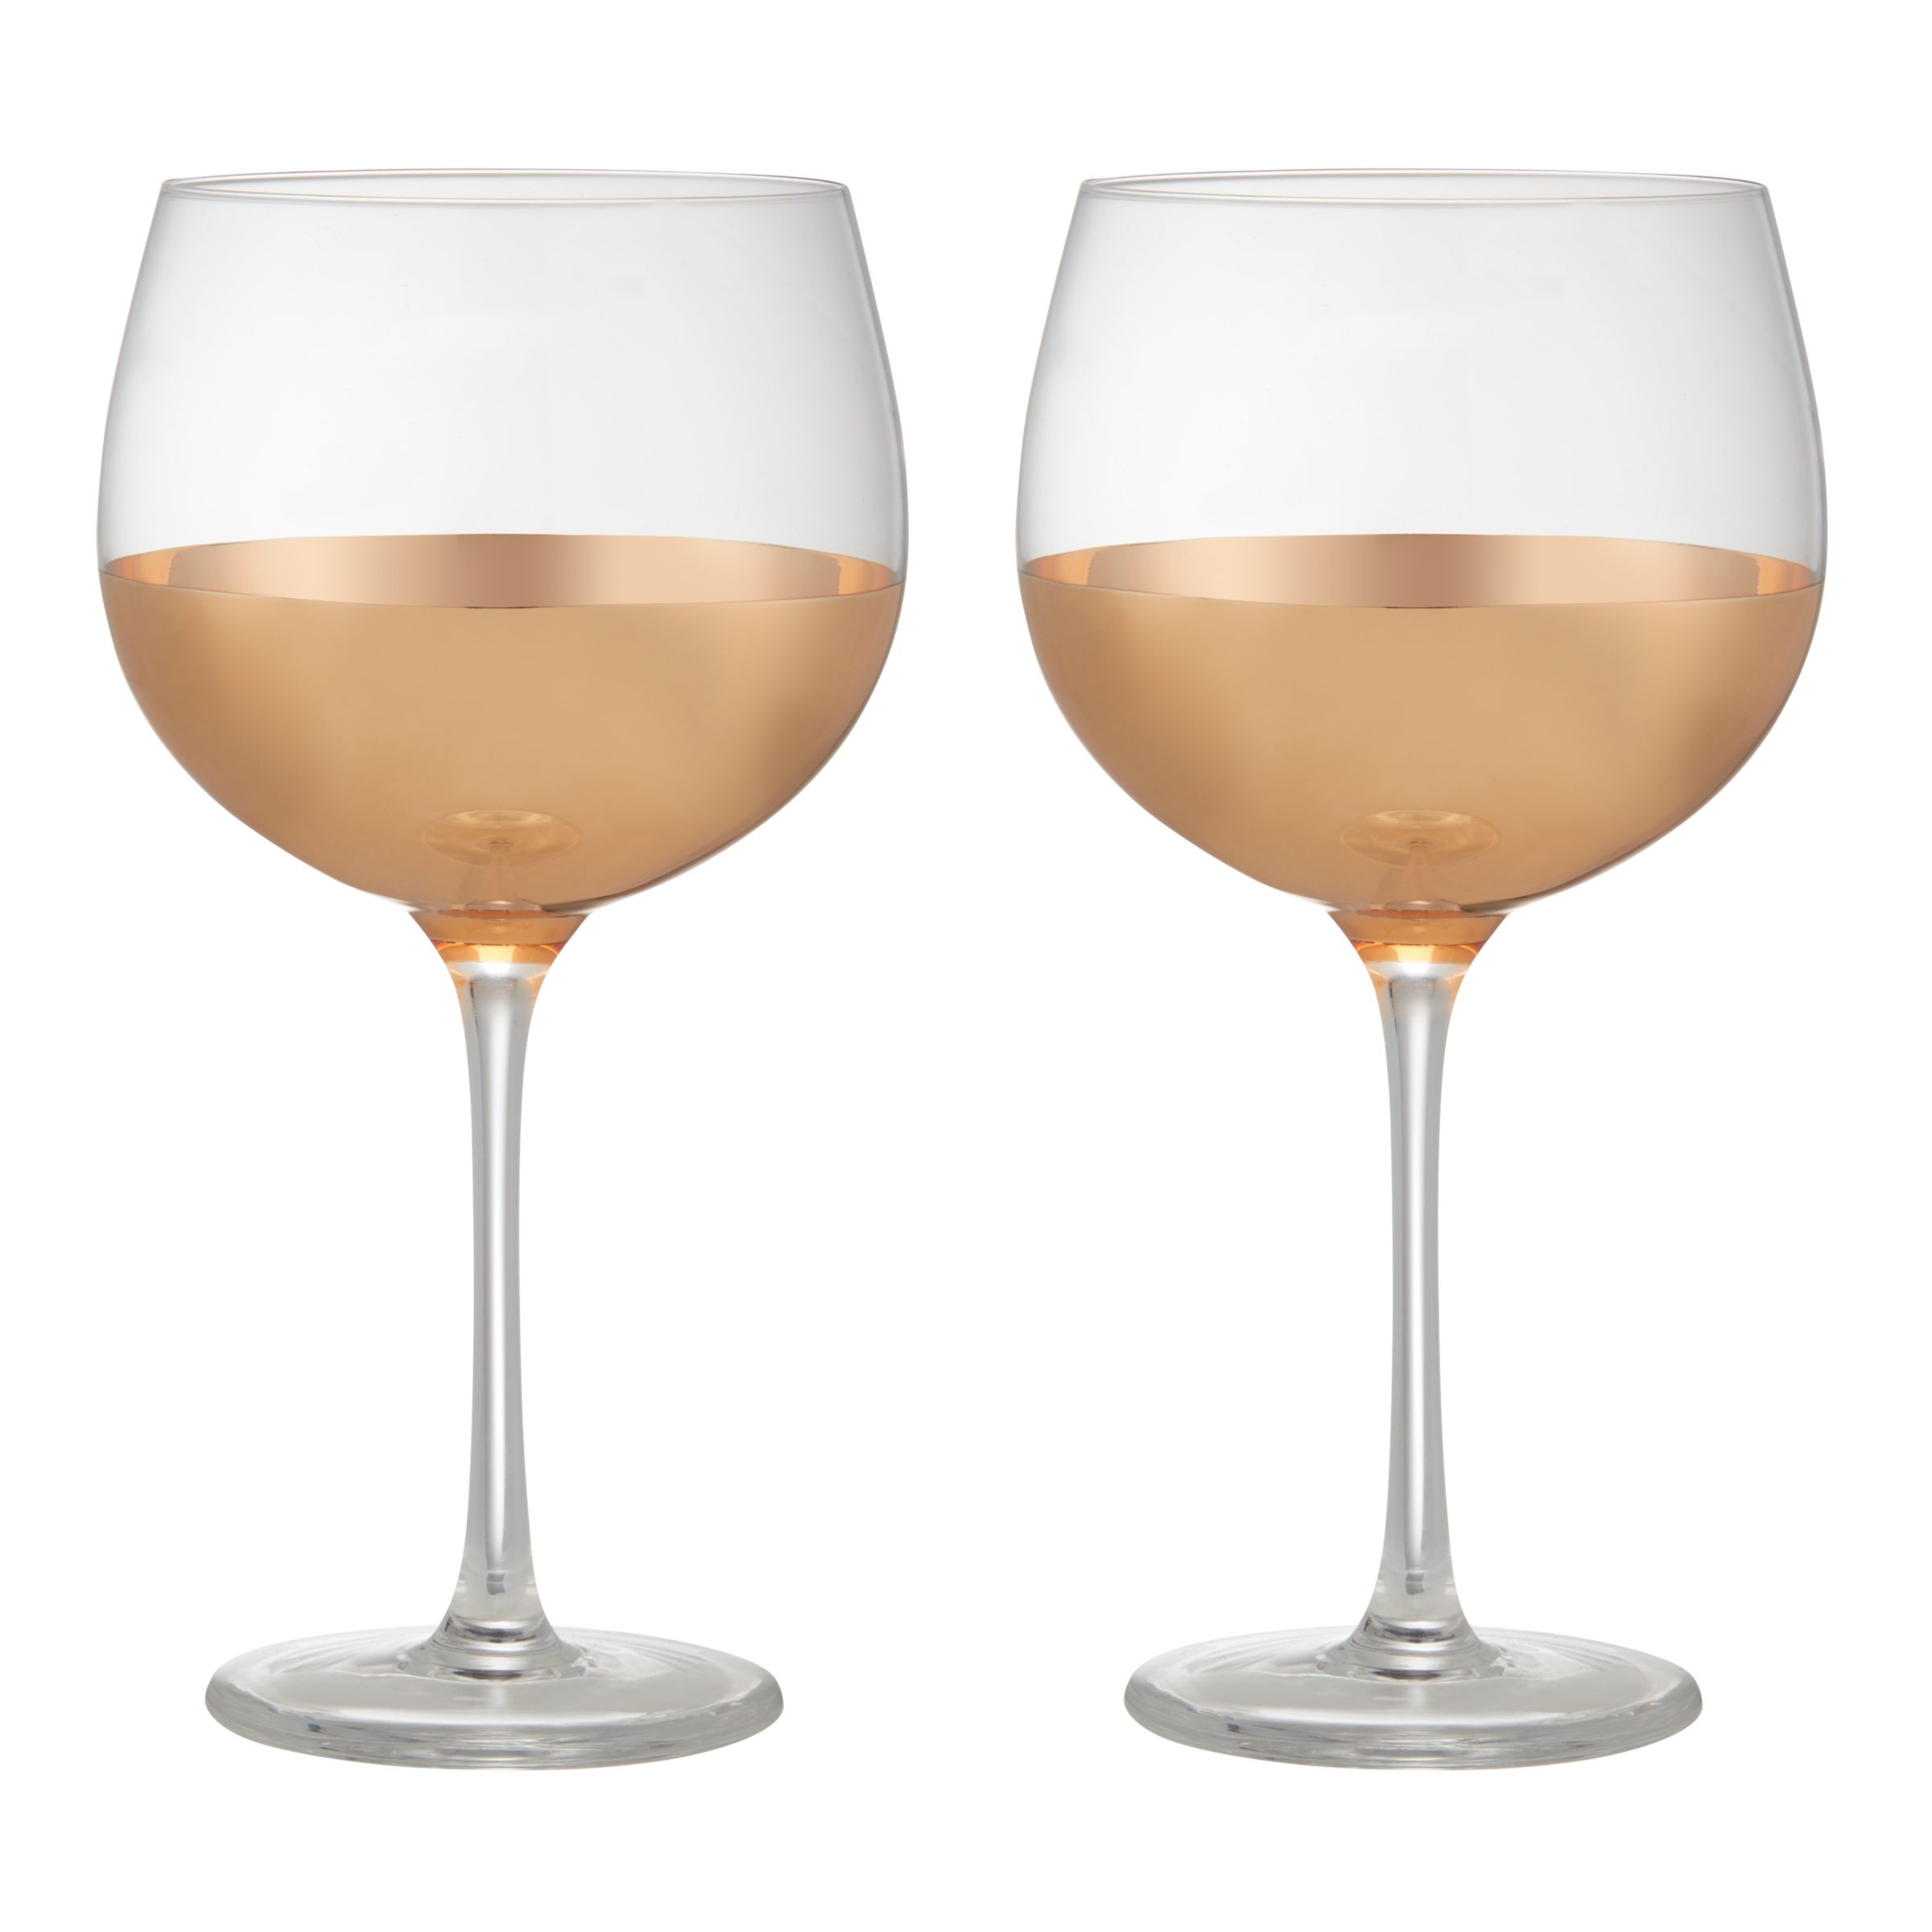 John Lewis & Partners Gin Glasses, 550ml, Set of 2, Clear/Gold